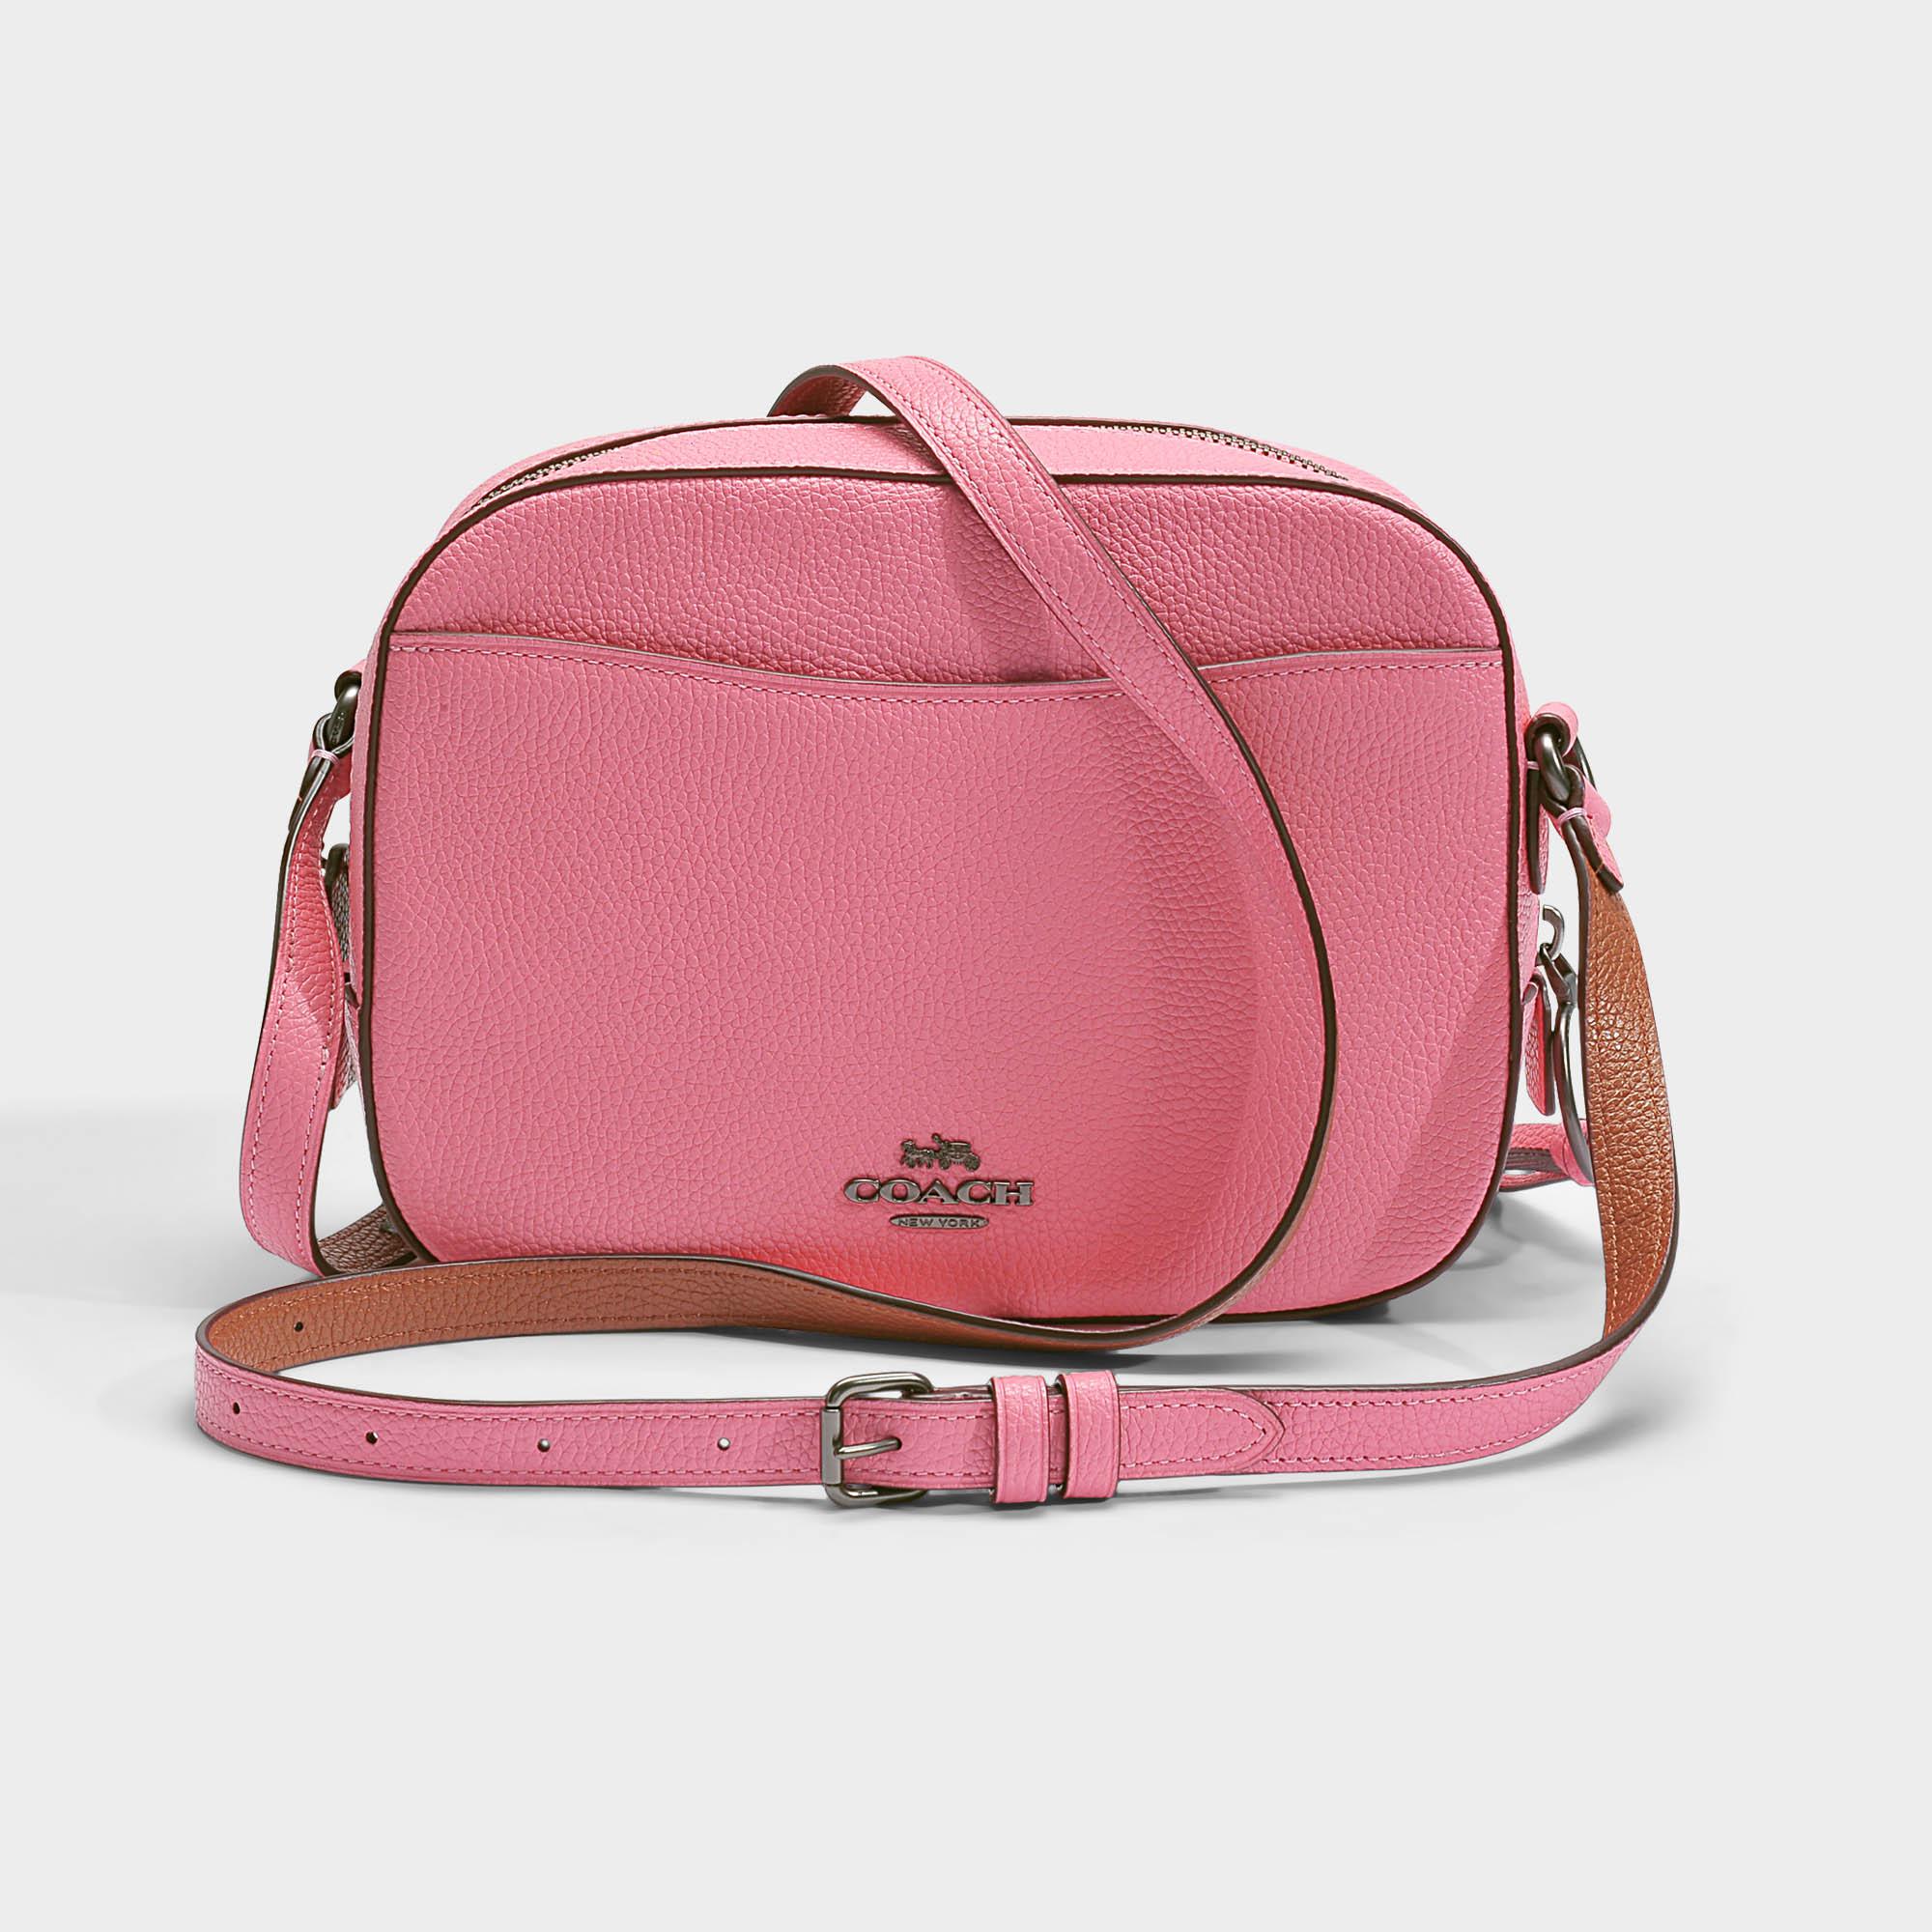 COACH Camera Bag In Bright Pink Leather - Lyst